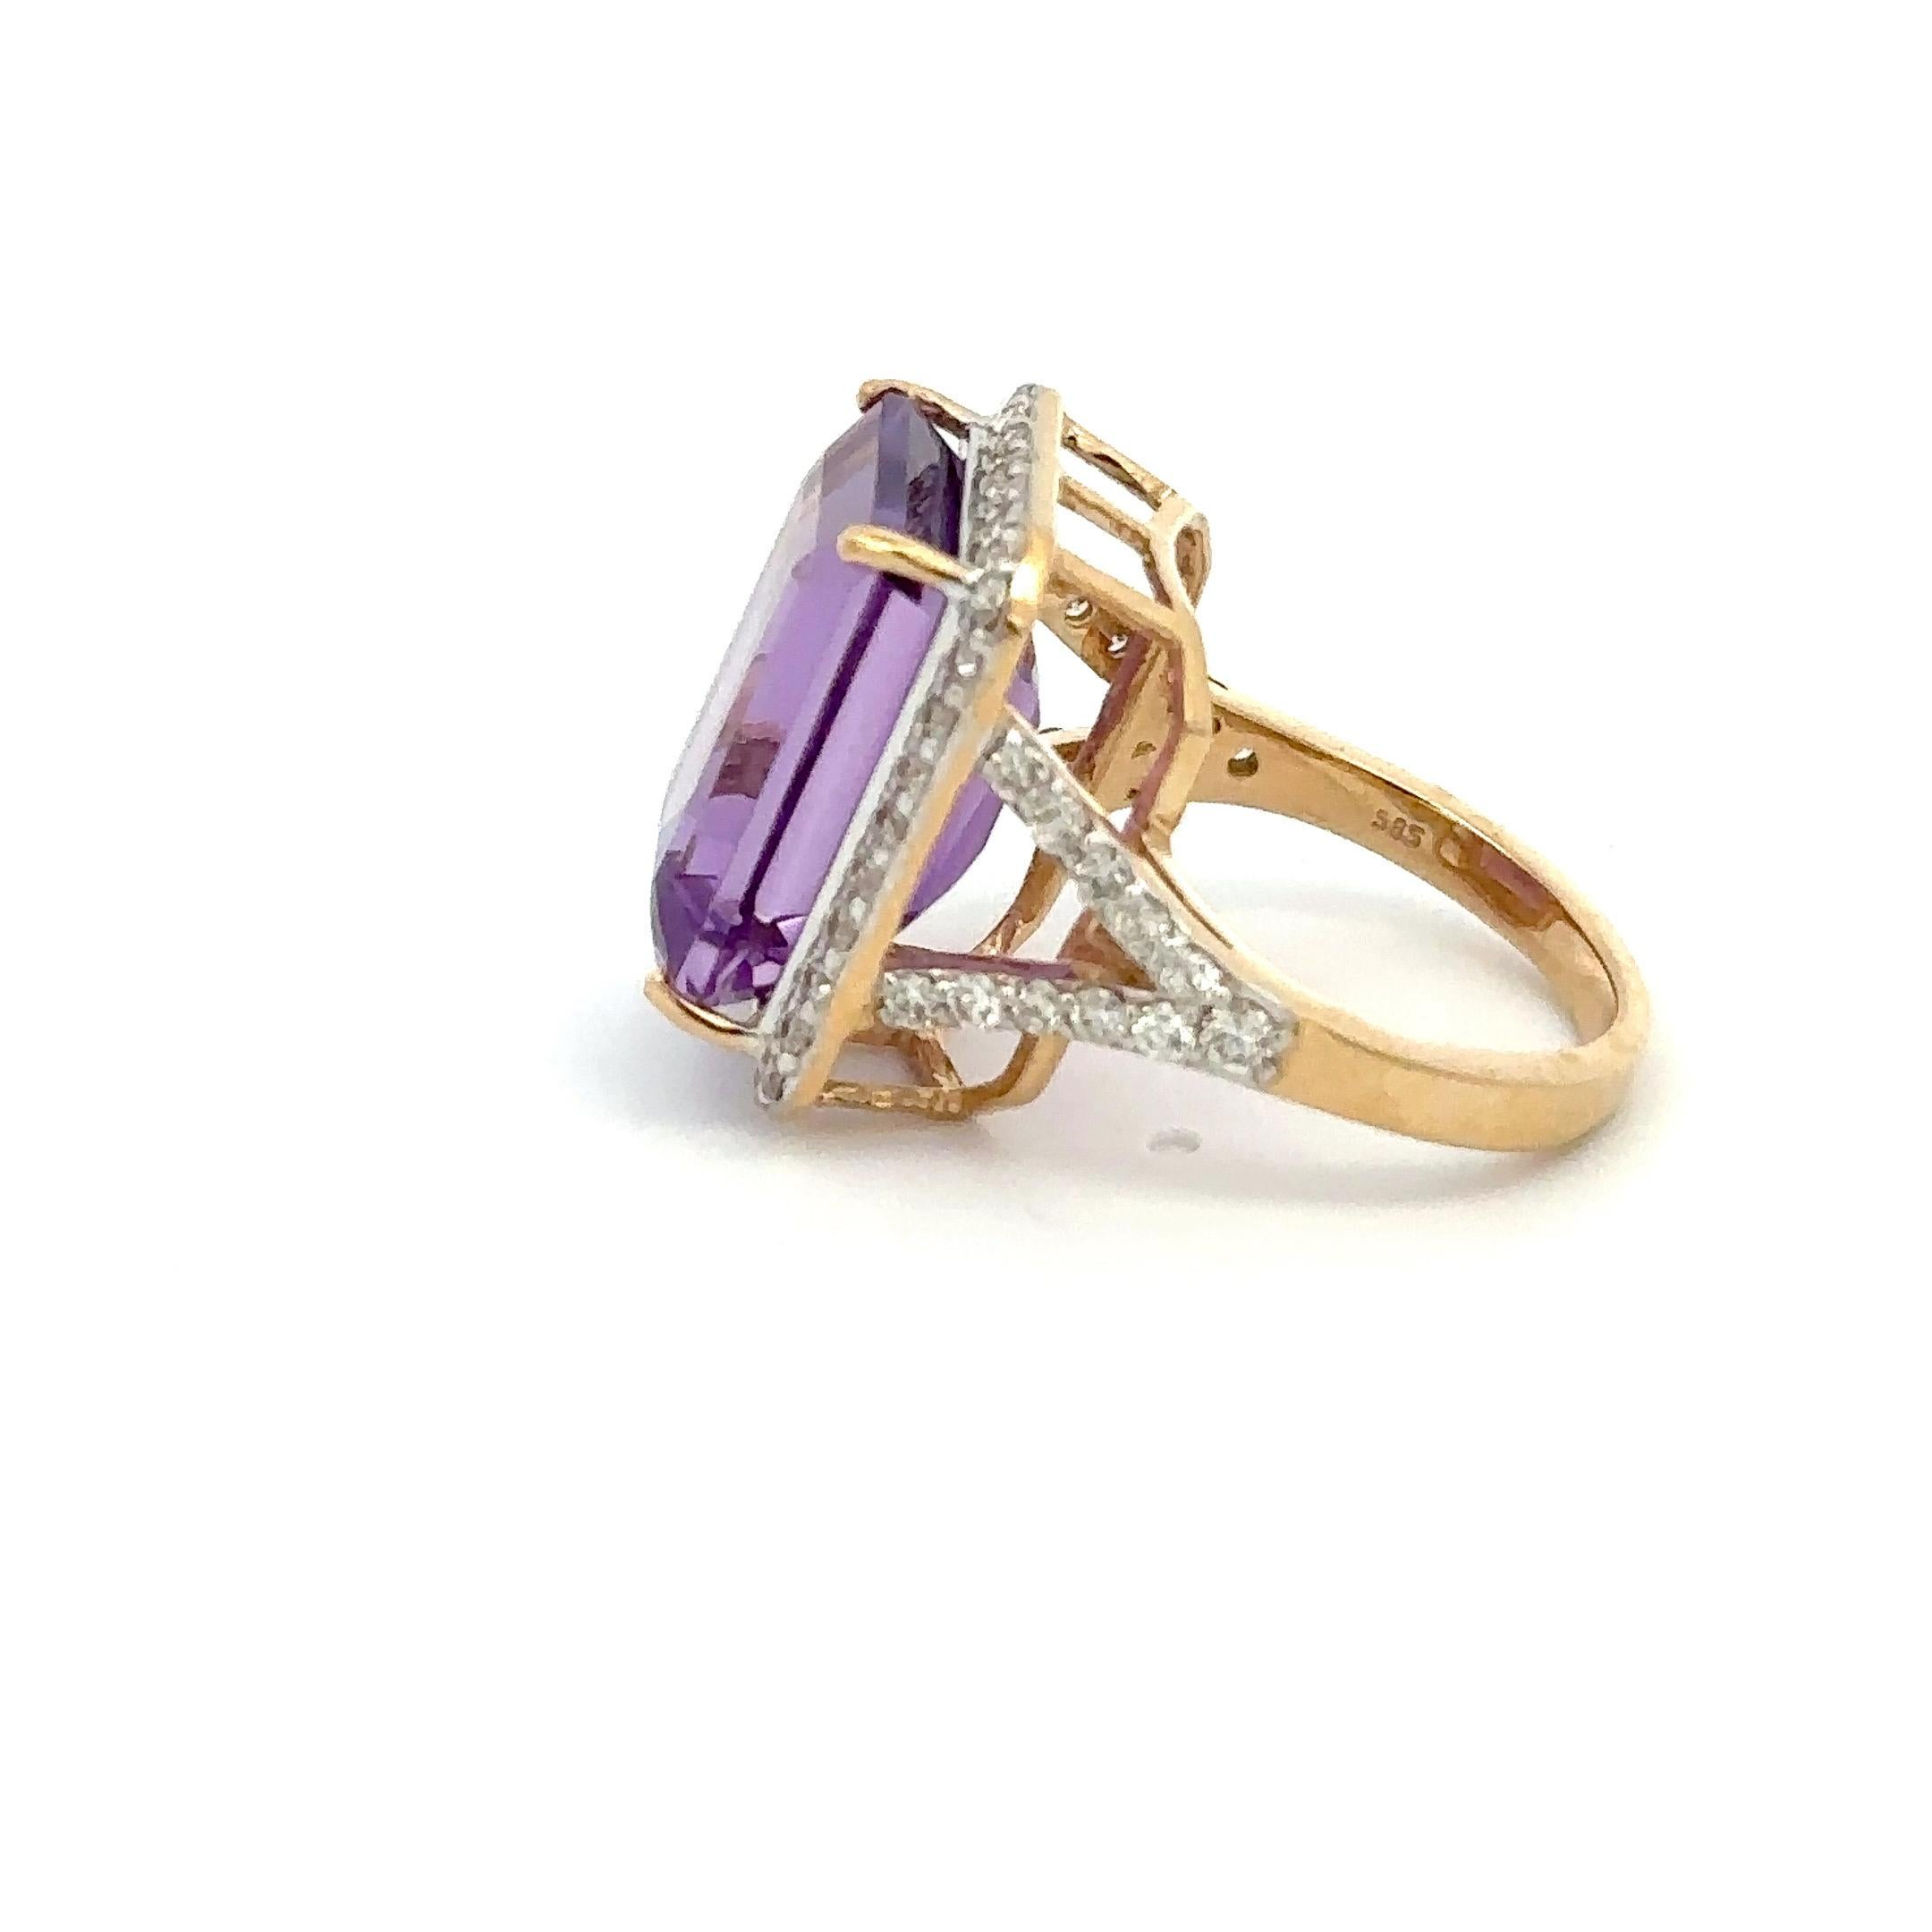 For Sale:  14k Solid Yellow Gold 13.33 Ct Large Octagon Amethyst and Diamond Cocktail Ring 7